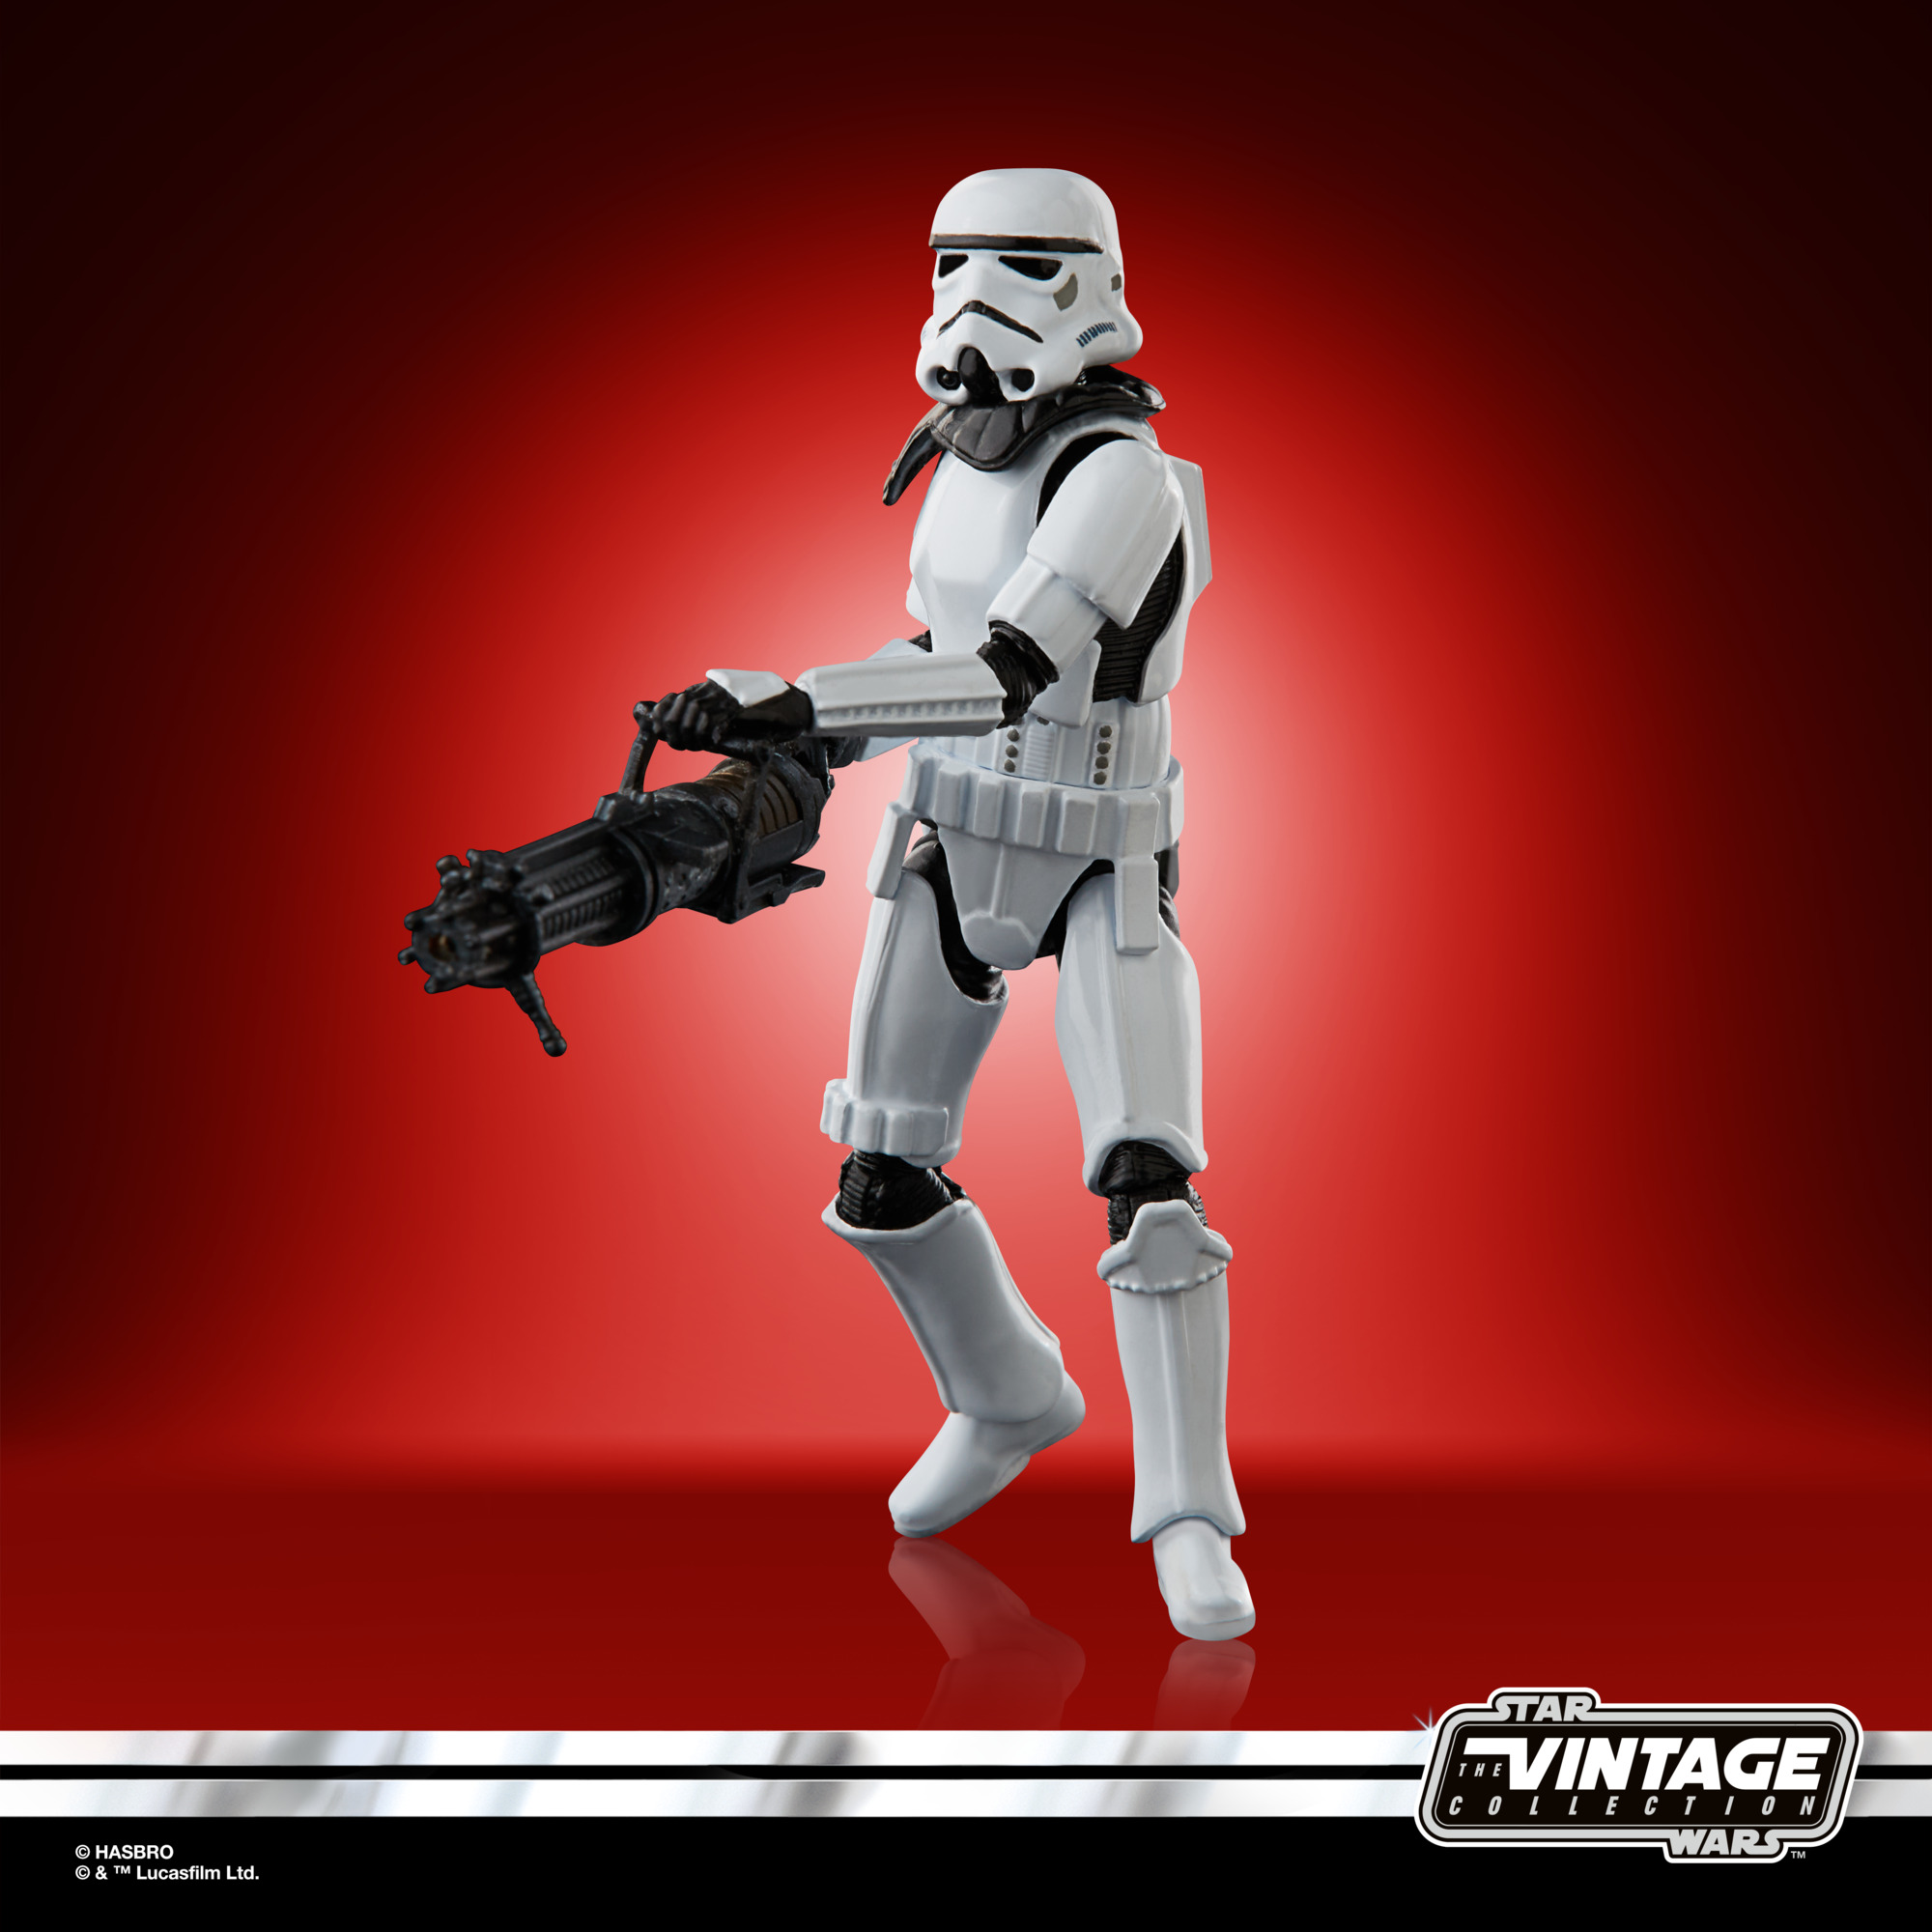 Star Wars The Vintage Collection Gaming Greats Heavy Assault Stormtrooper F55565L00 5010993968190